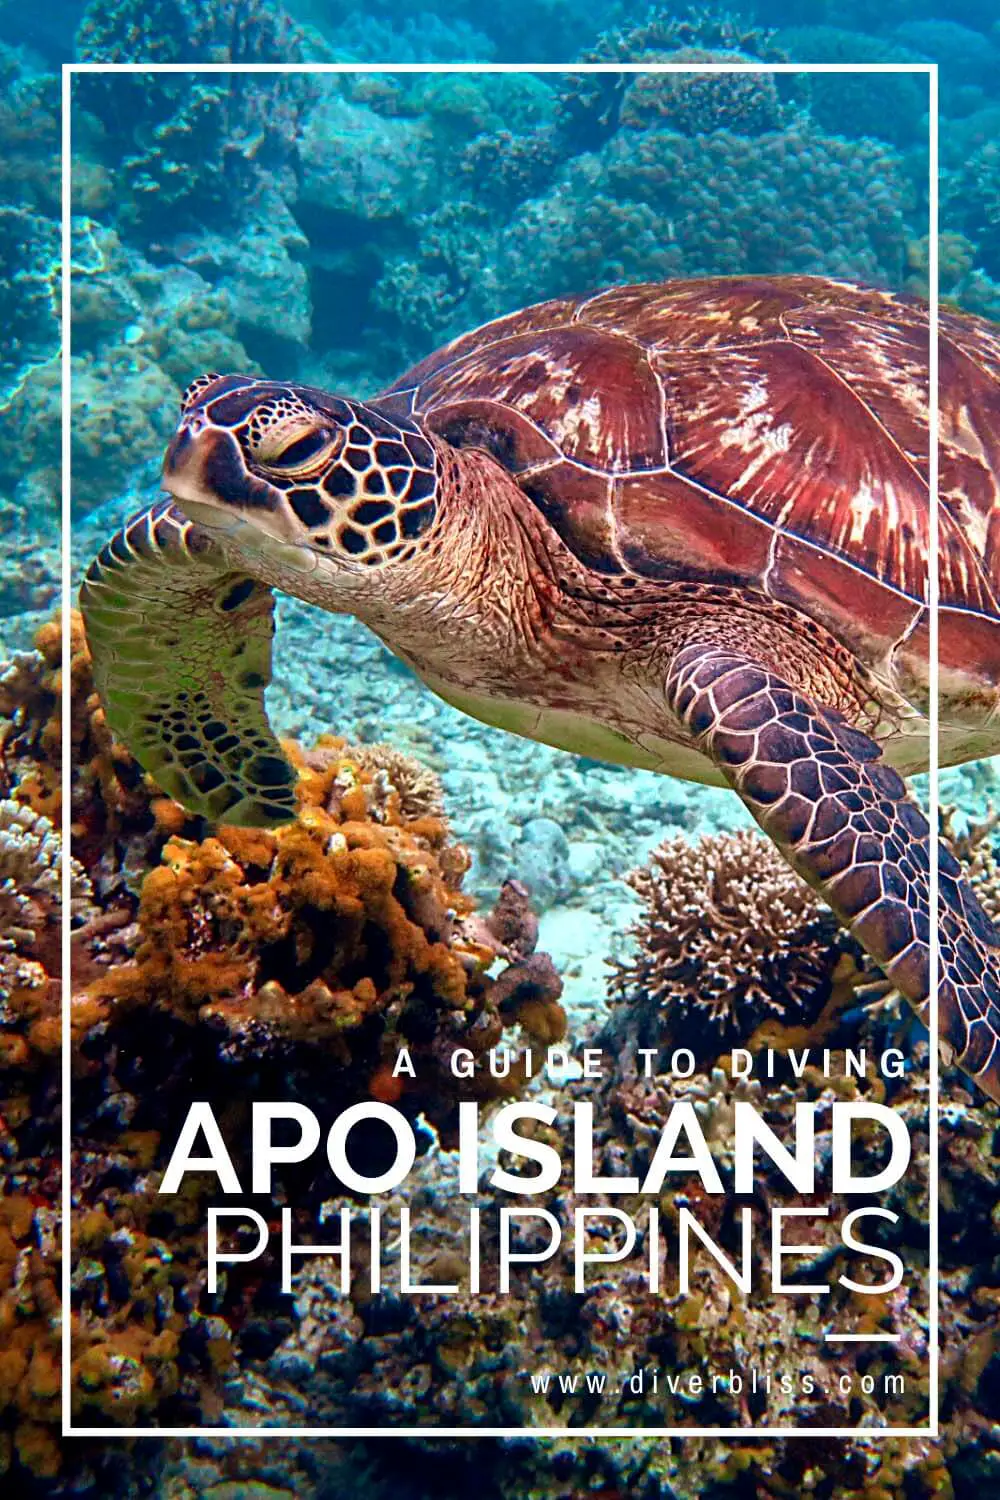 A guide to diving Apo Island Philippines